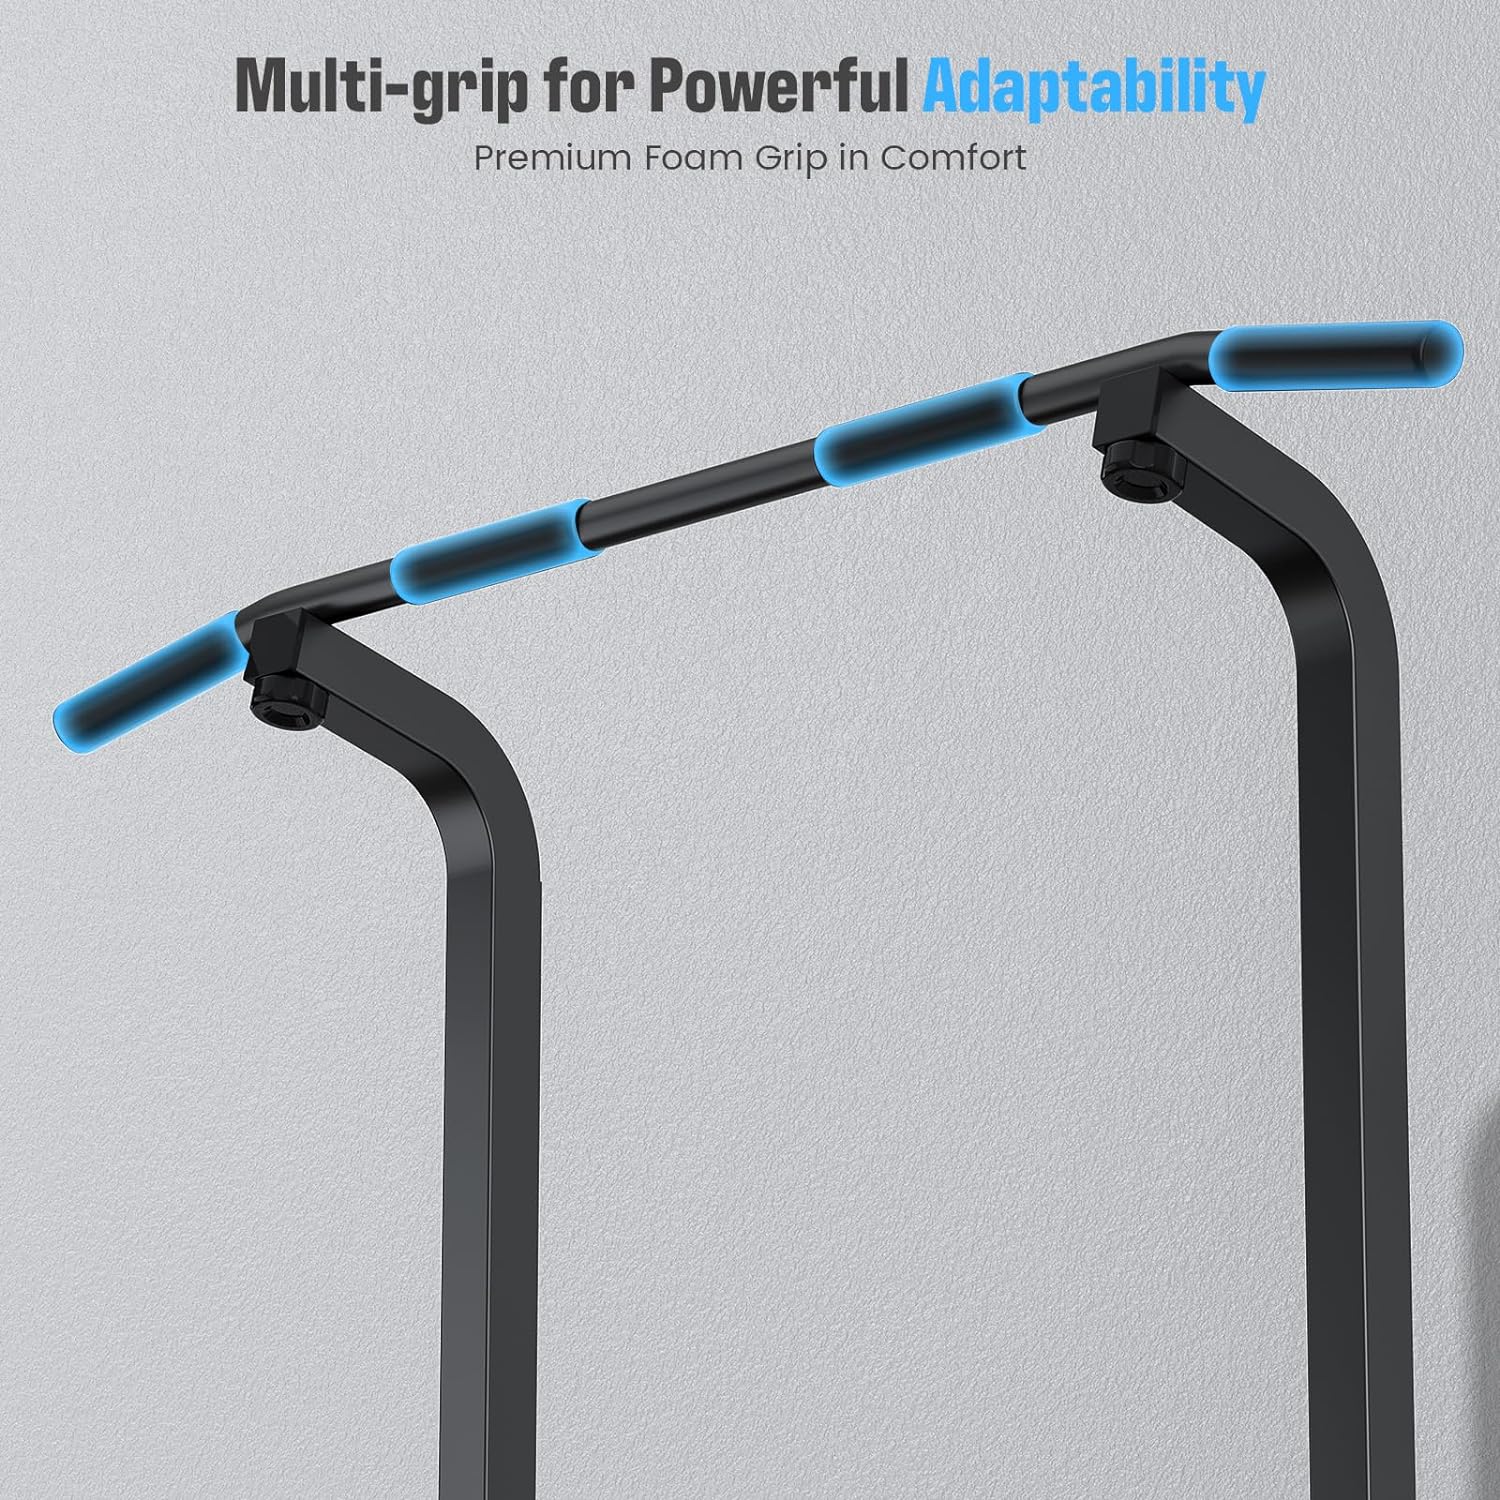 Sportsroyals Power Tower Dip Station Pull Up Bar for Home Gym Strength Training Workout Equipment, 400LBS.